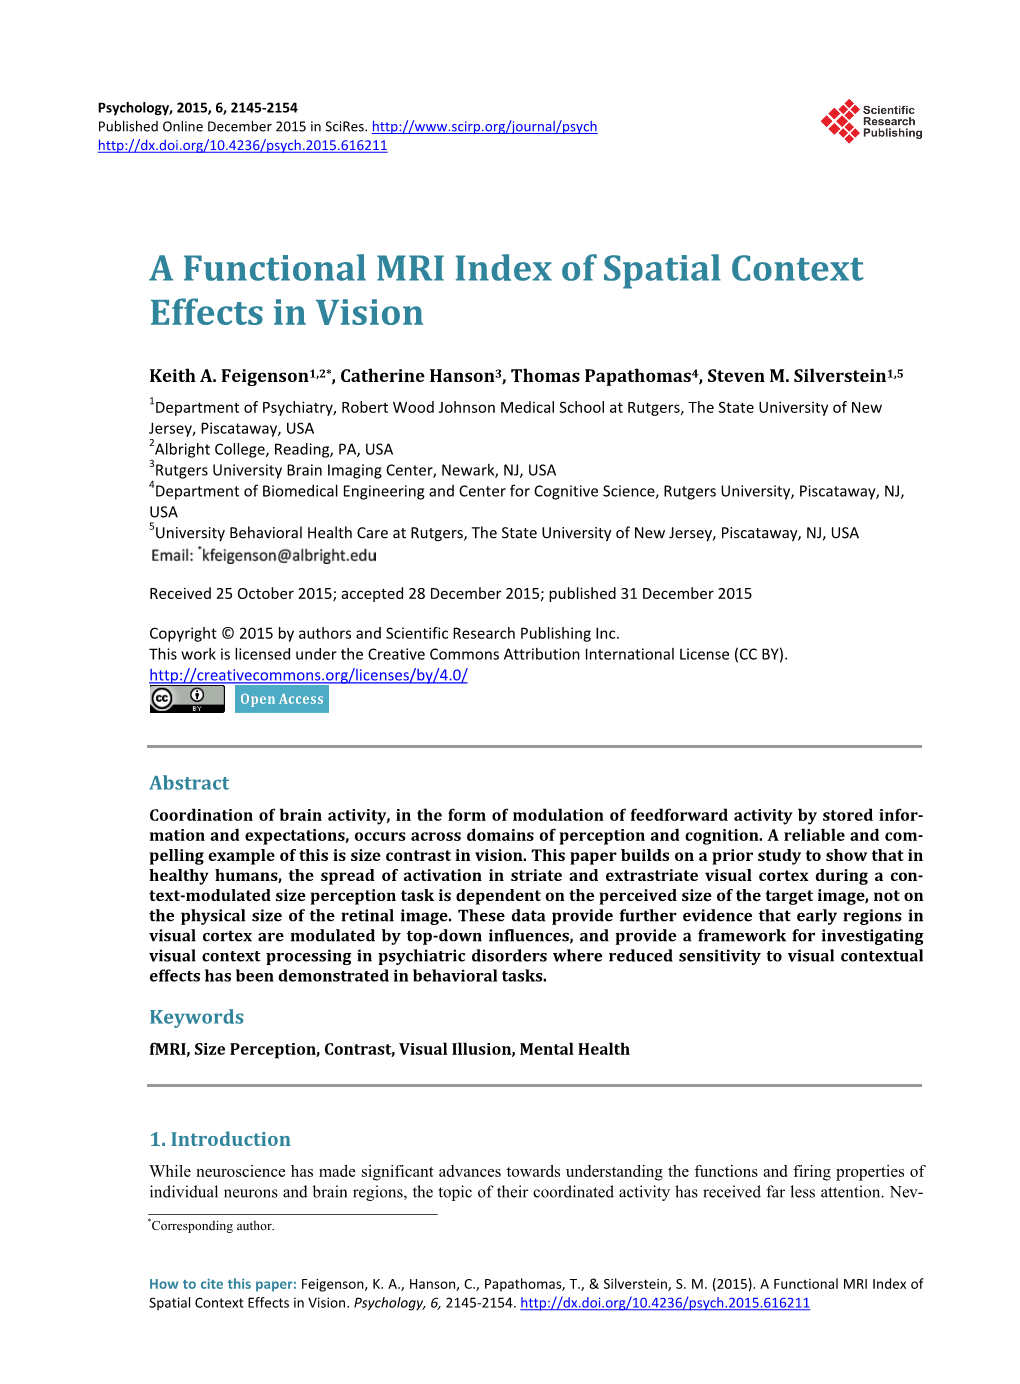 A Functional MRI Index of Spatial Context Effects in Vision